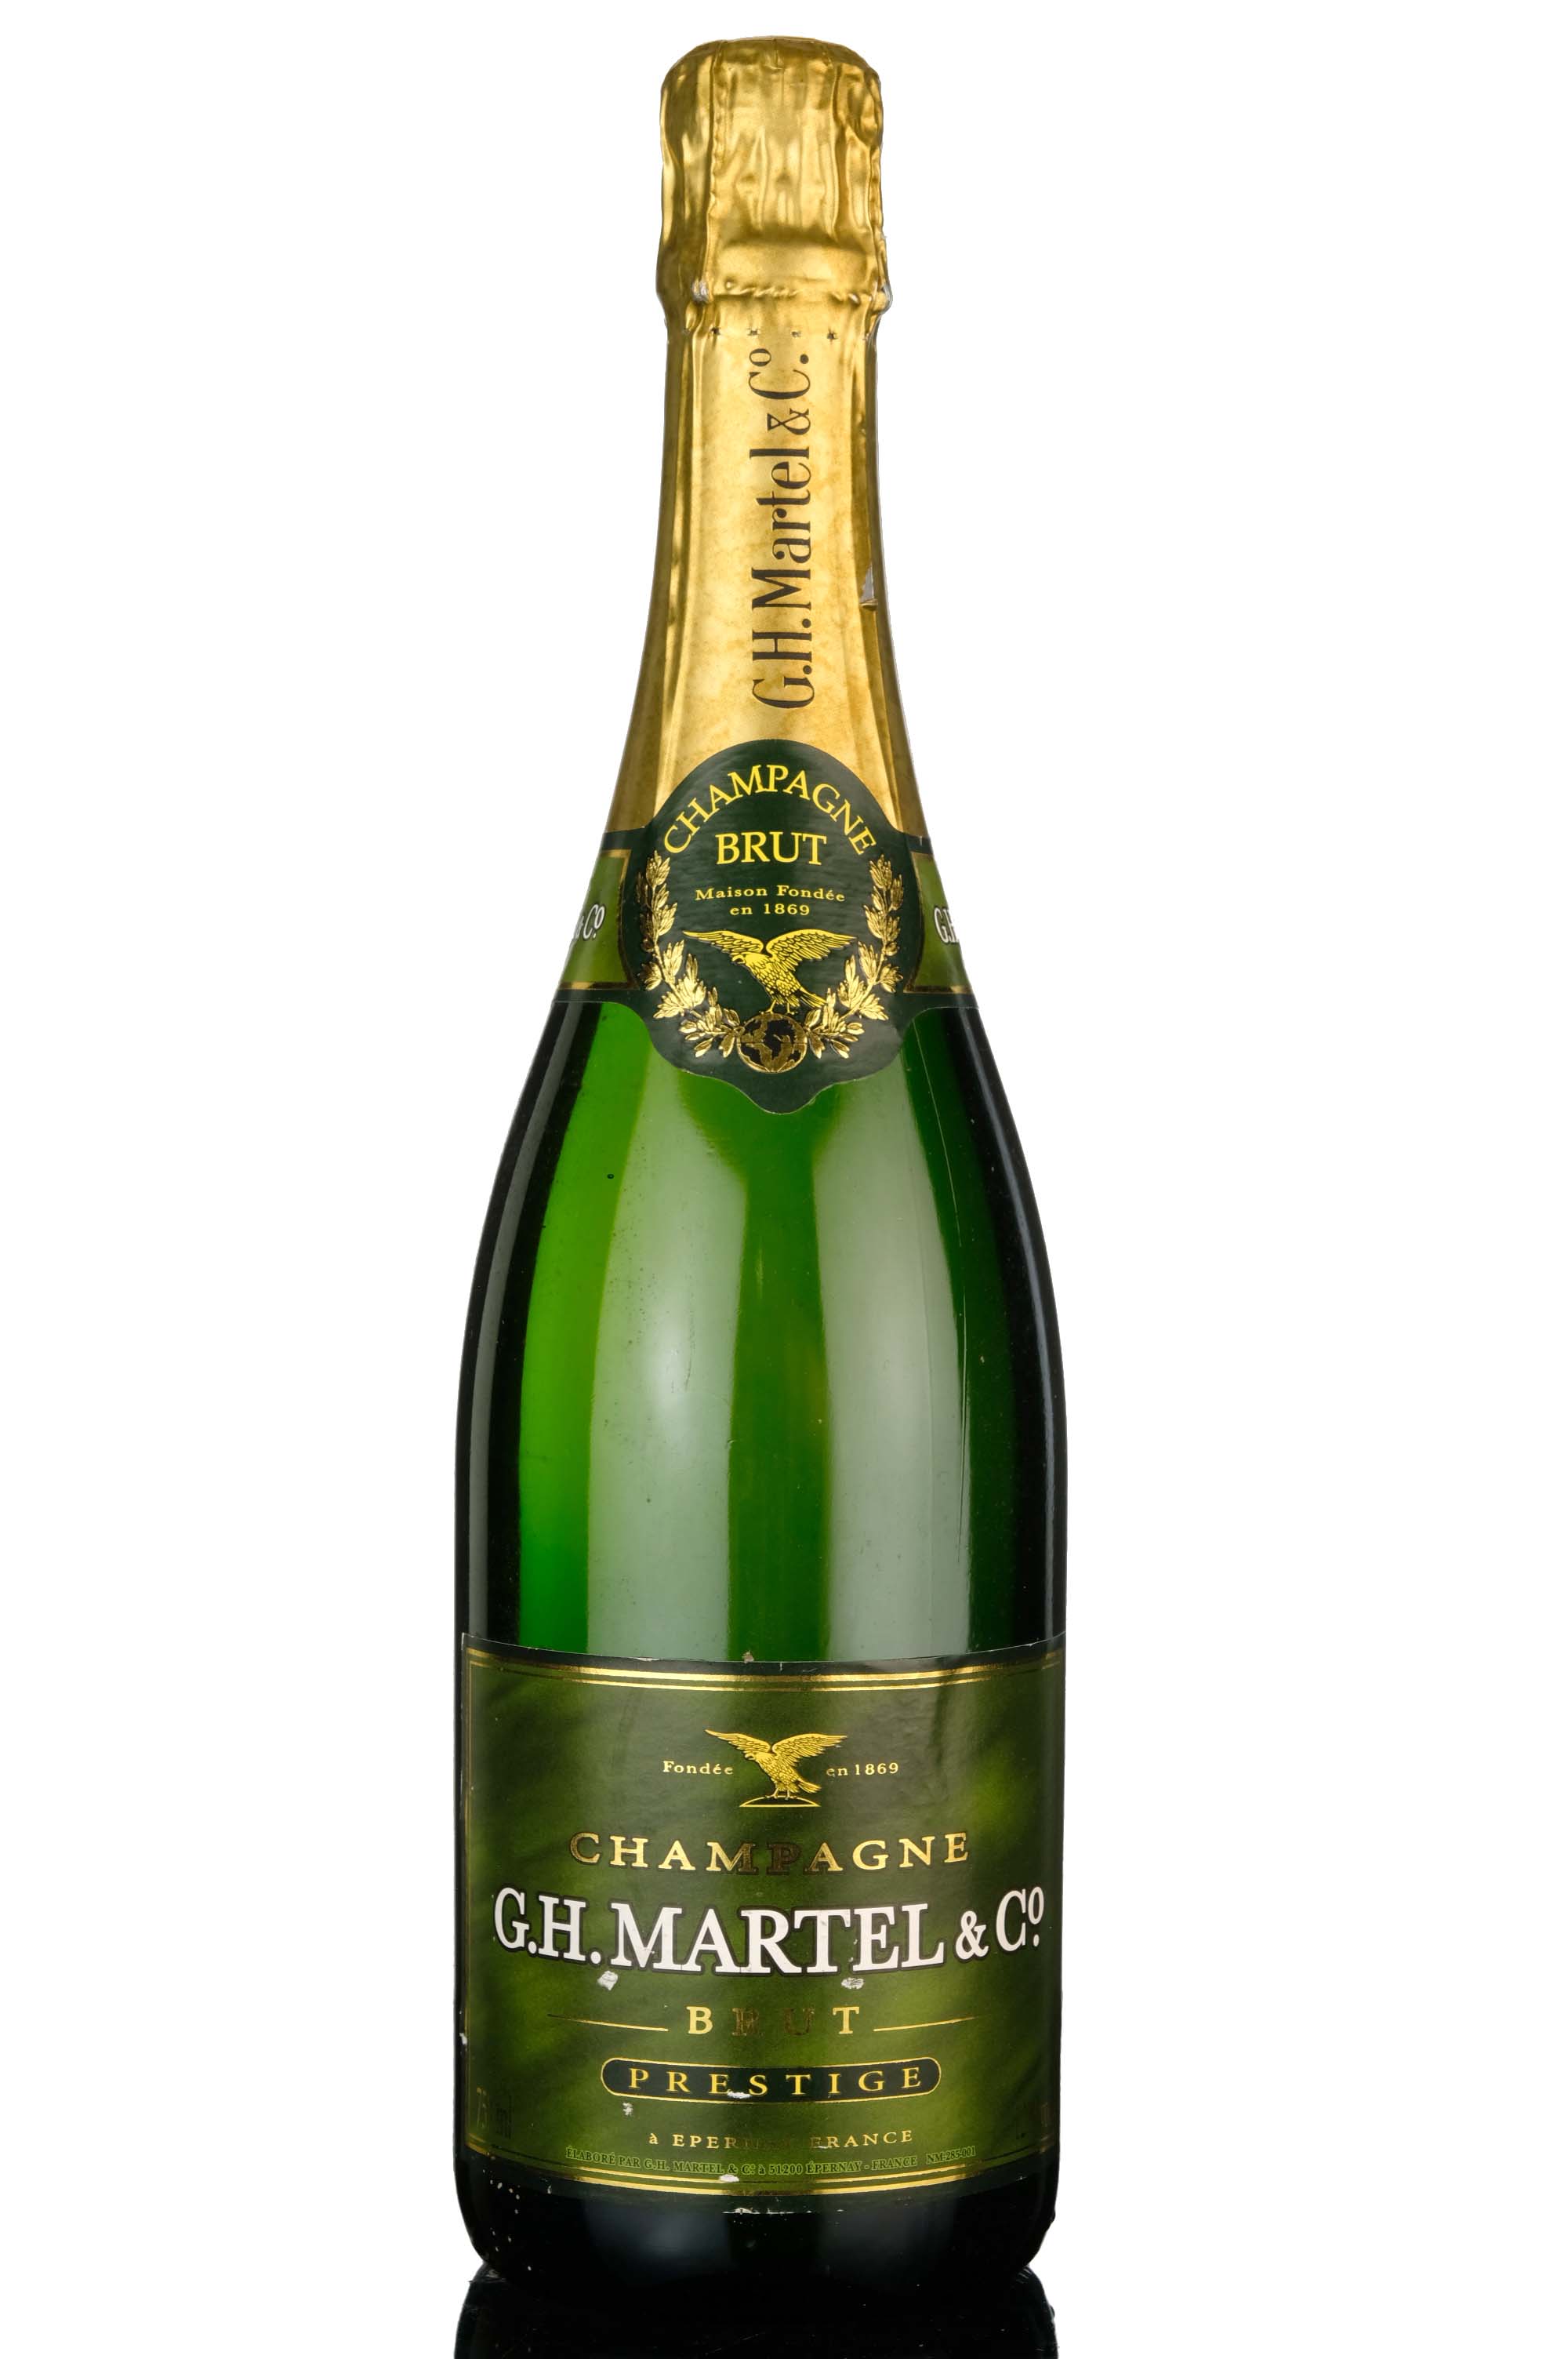 G.H. Martell & Co. Champagne